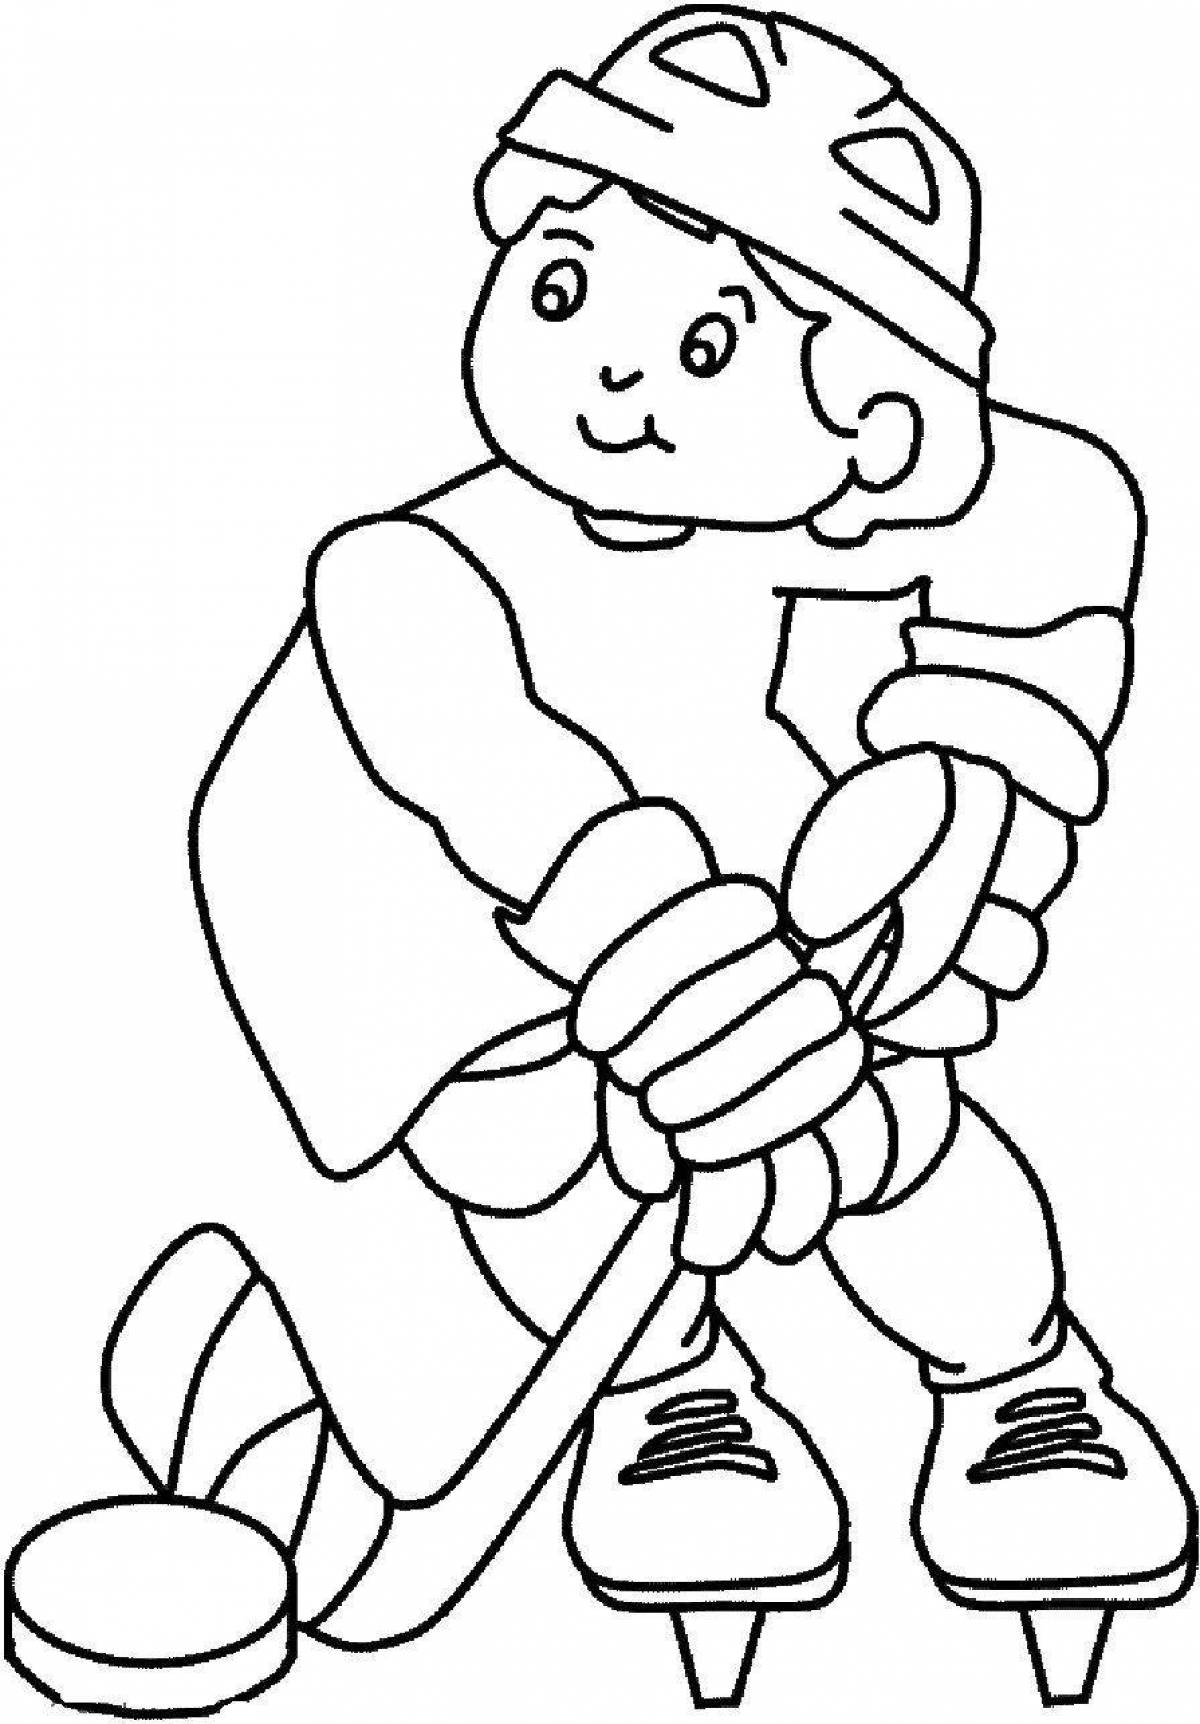 Awesome sports coloring pages for preschoolers